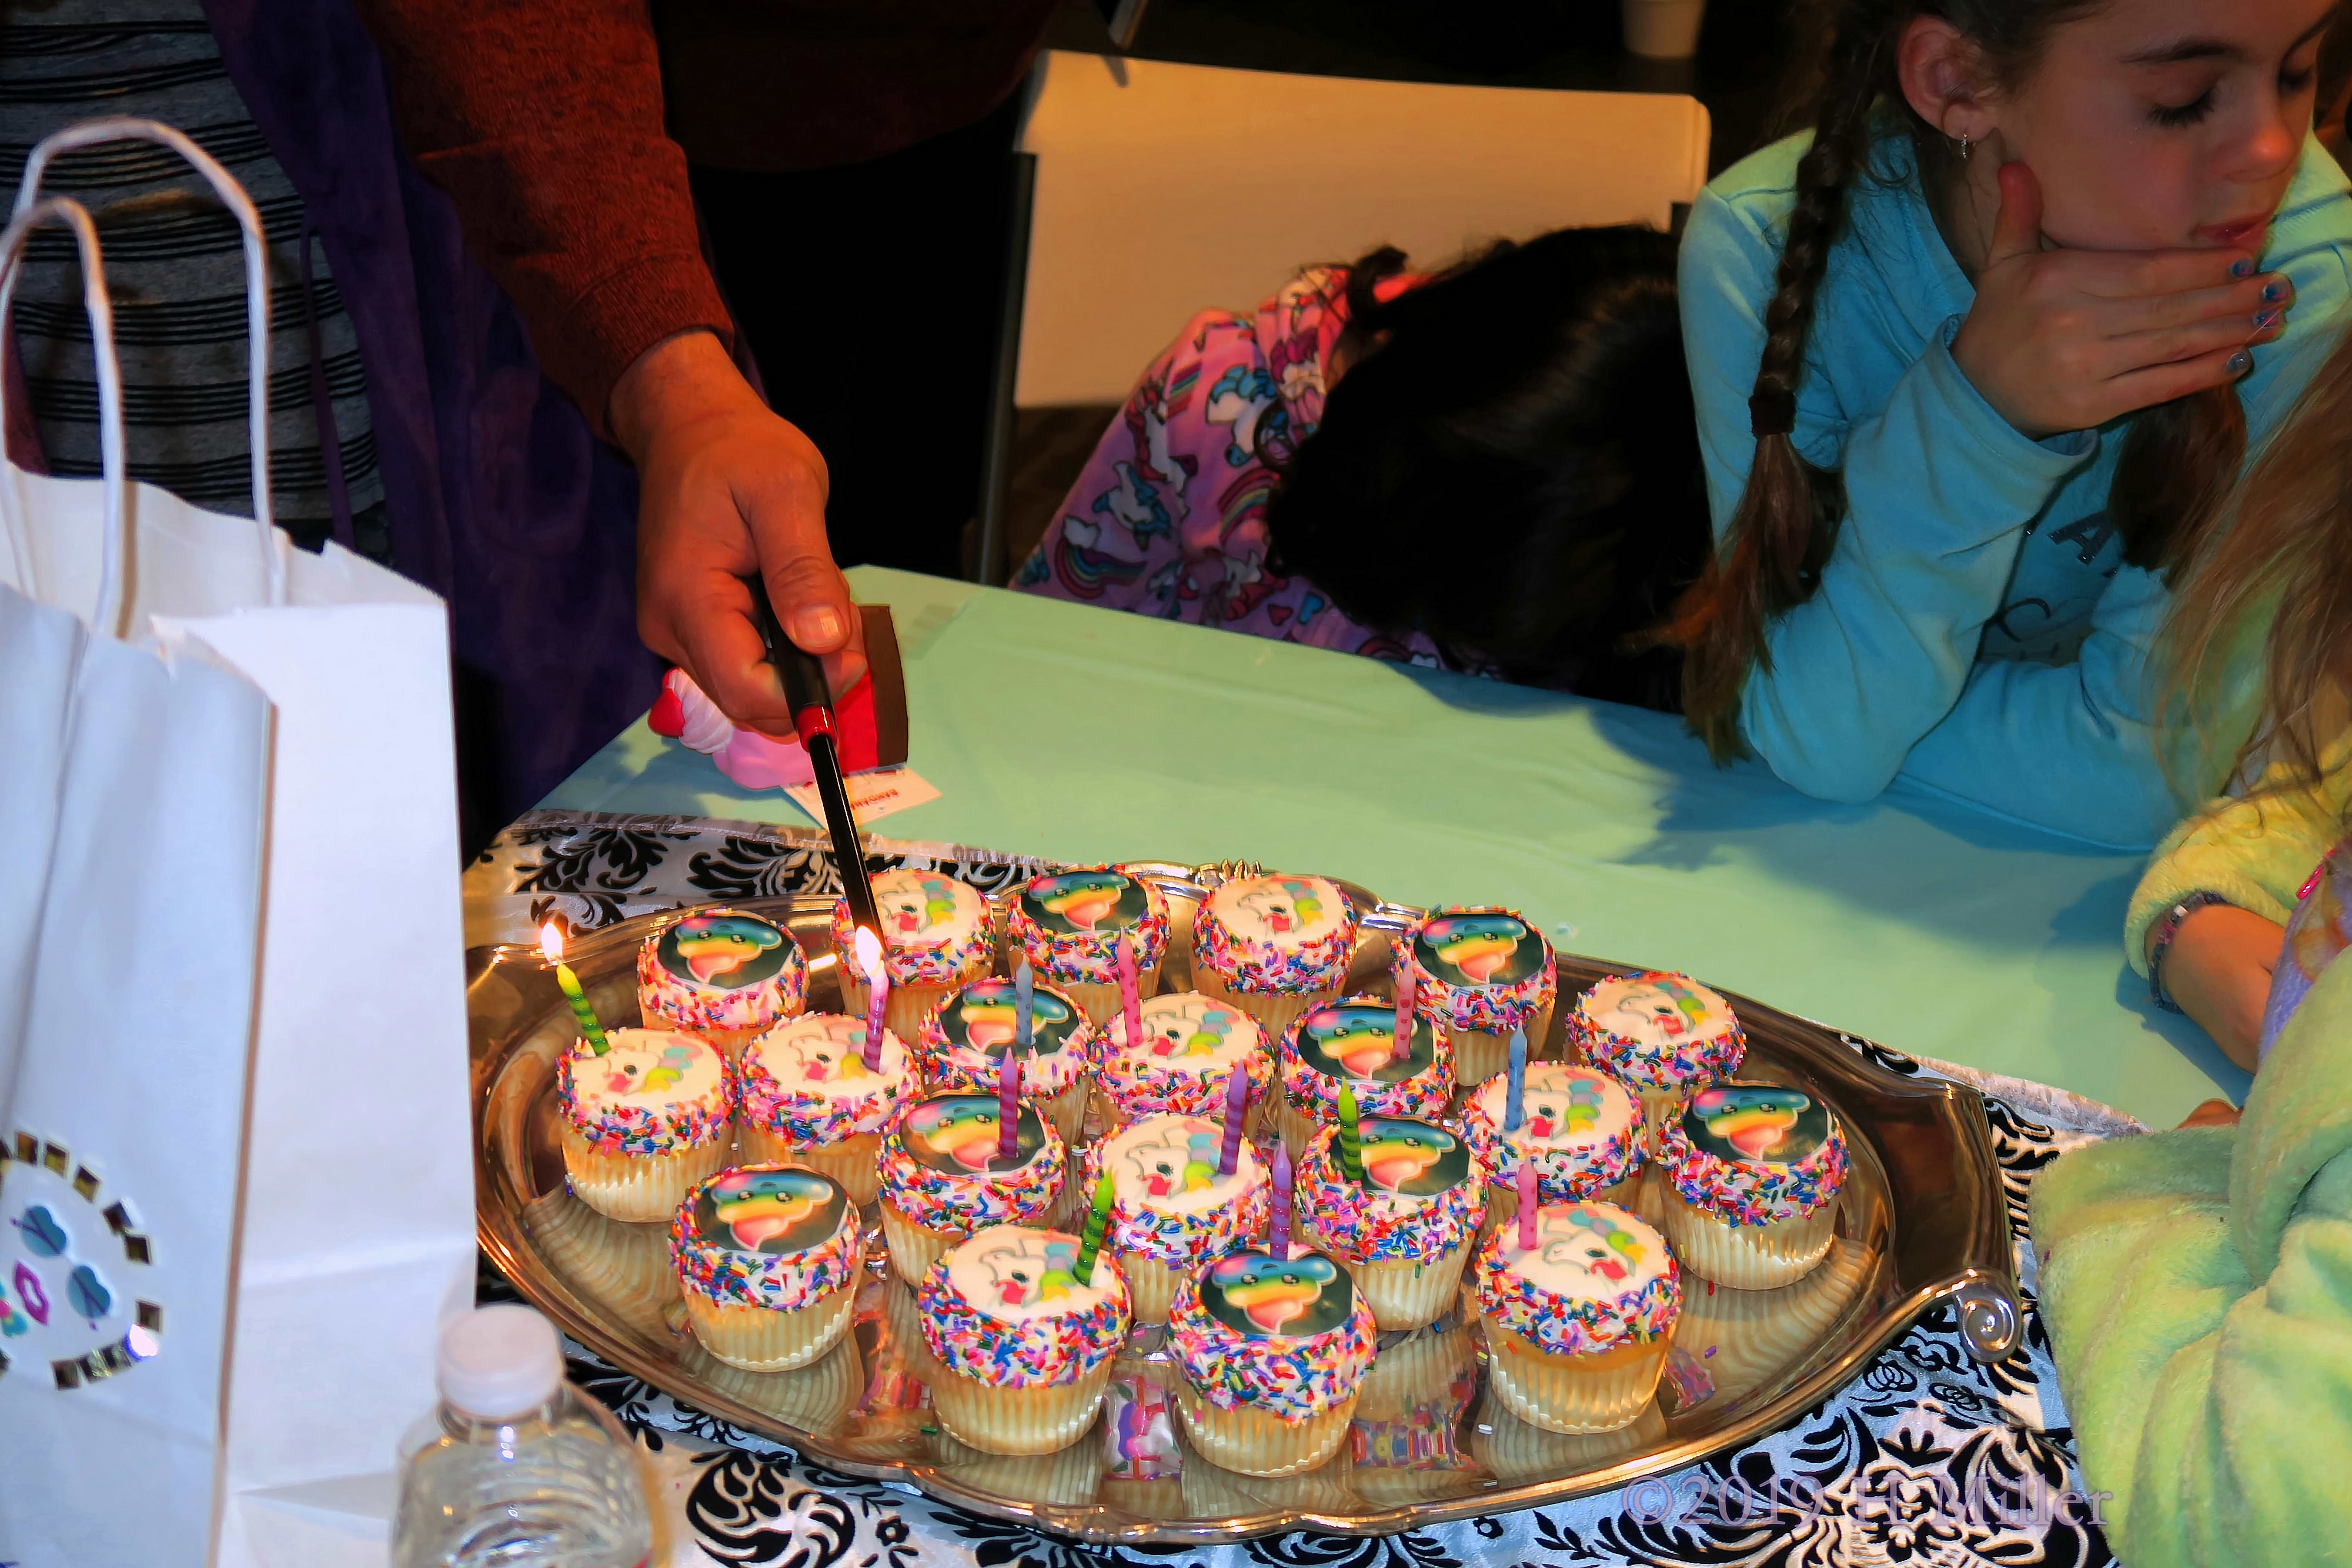 Igniting Fire! Cupcake Birthday Candles Are Lit! 4